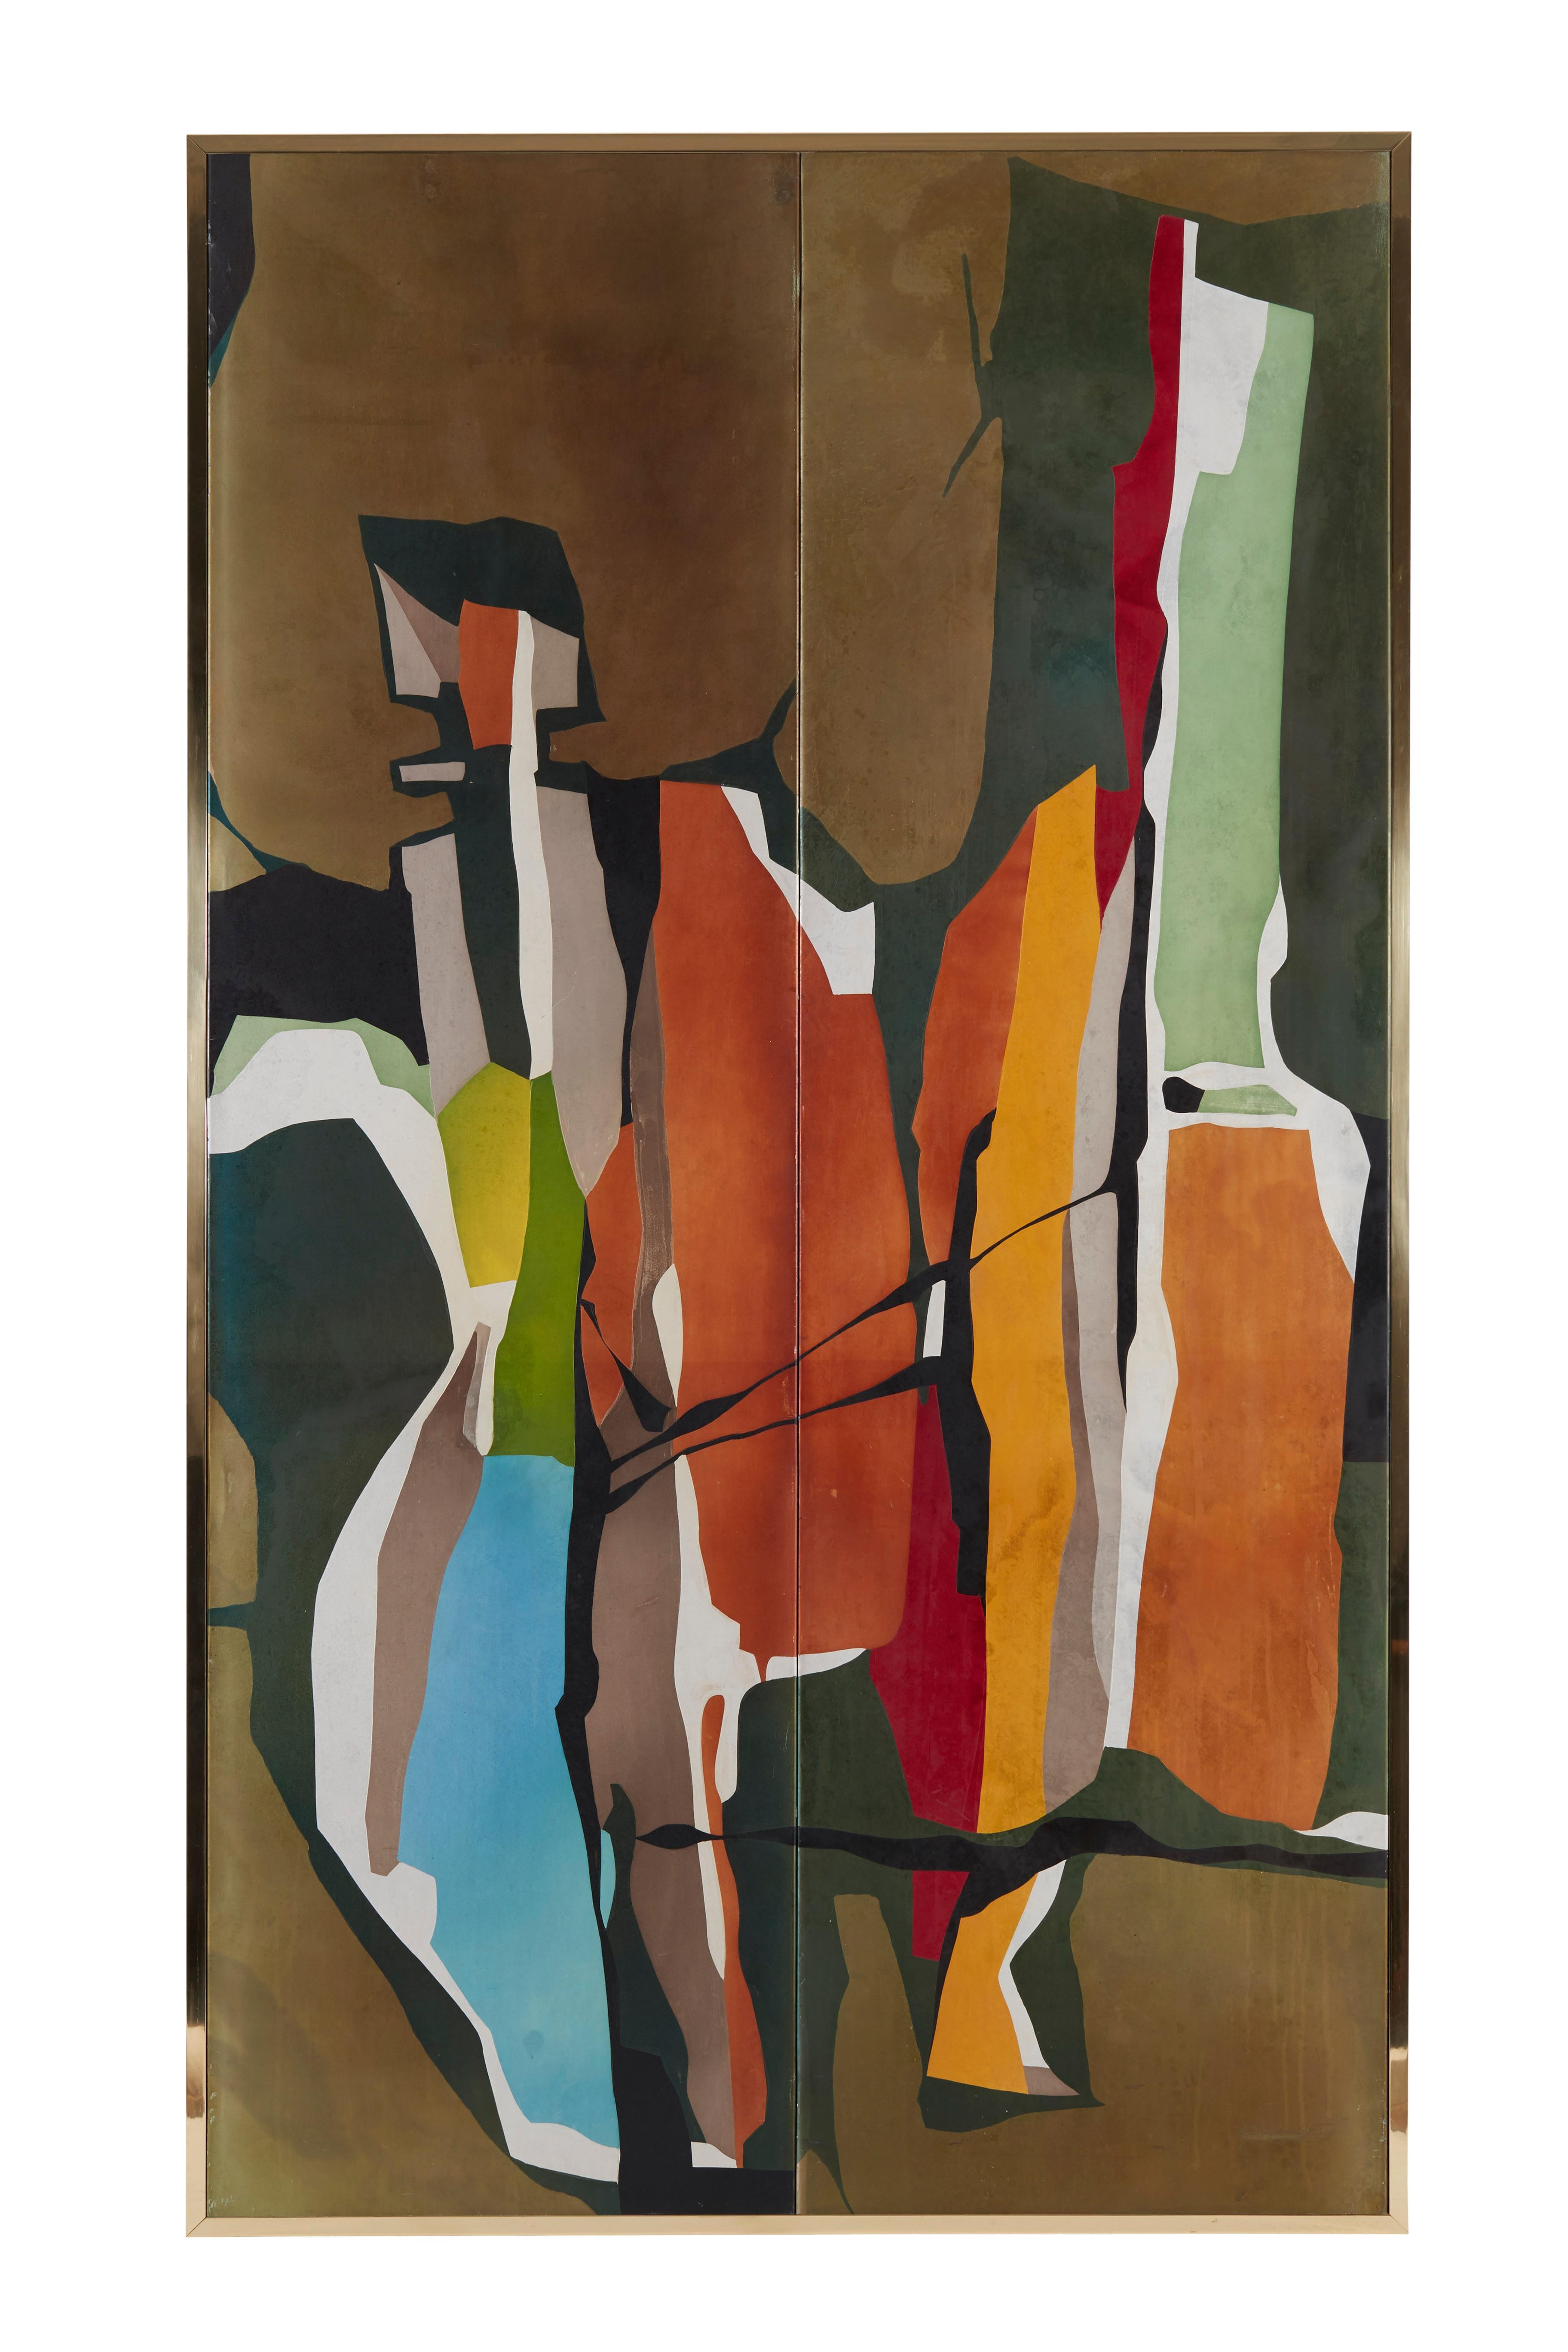 Robert Pansart (1909-1973)

Panels were realized for the Cruise Liner France in 1961
Polychromed, engraved and oxidized aluminum panel.


Dimensions : 
Hauteur, Height: 209 cm / 82.28 in
Largeur, Width: 120 cm / 47.24 in

Provenance : 
-